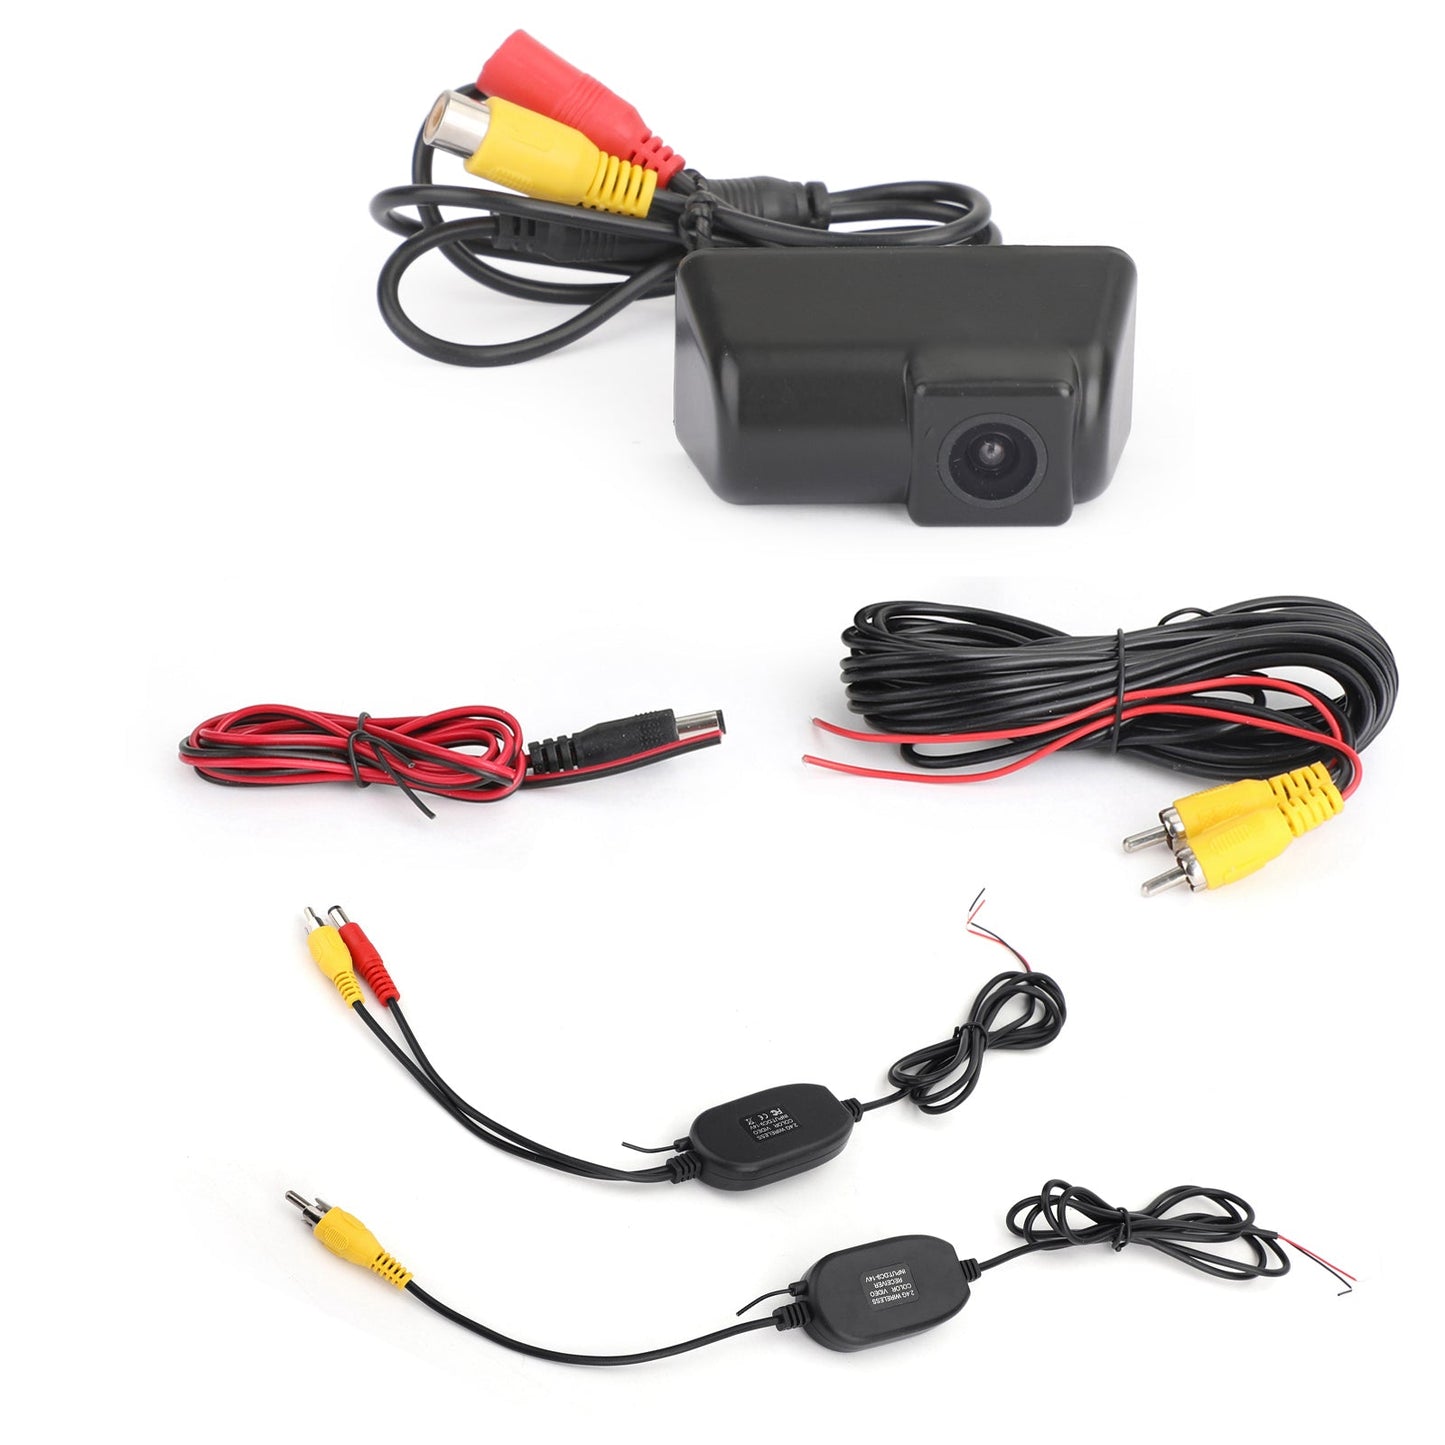 Reverse Backup CDD Waterproof HD Wireless Camera Kit for Ford /Transit /Connect